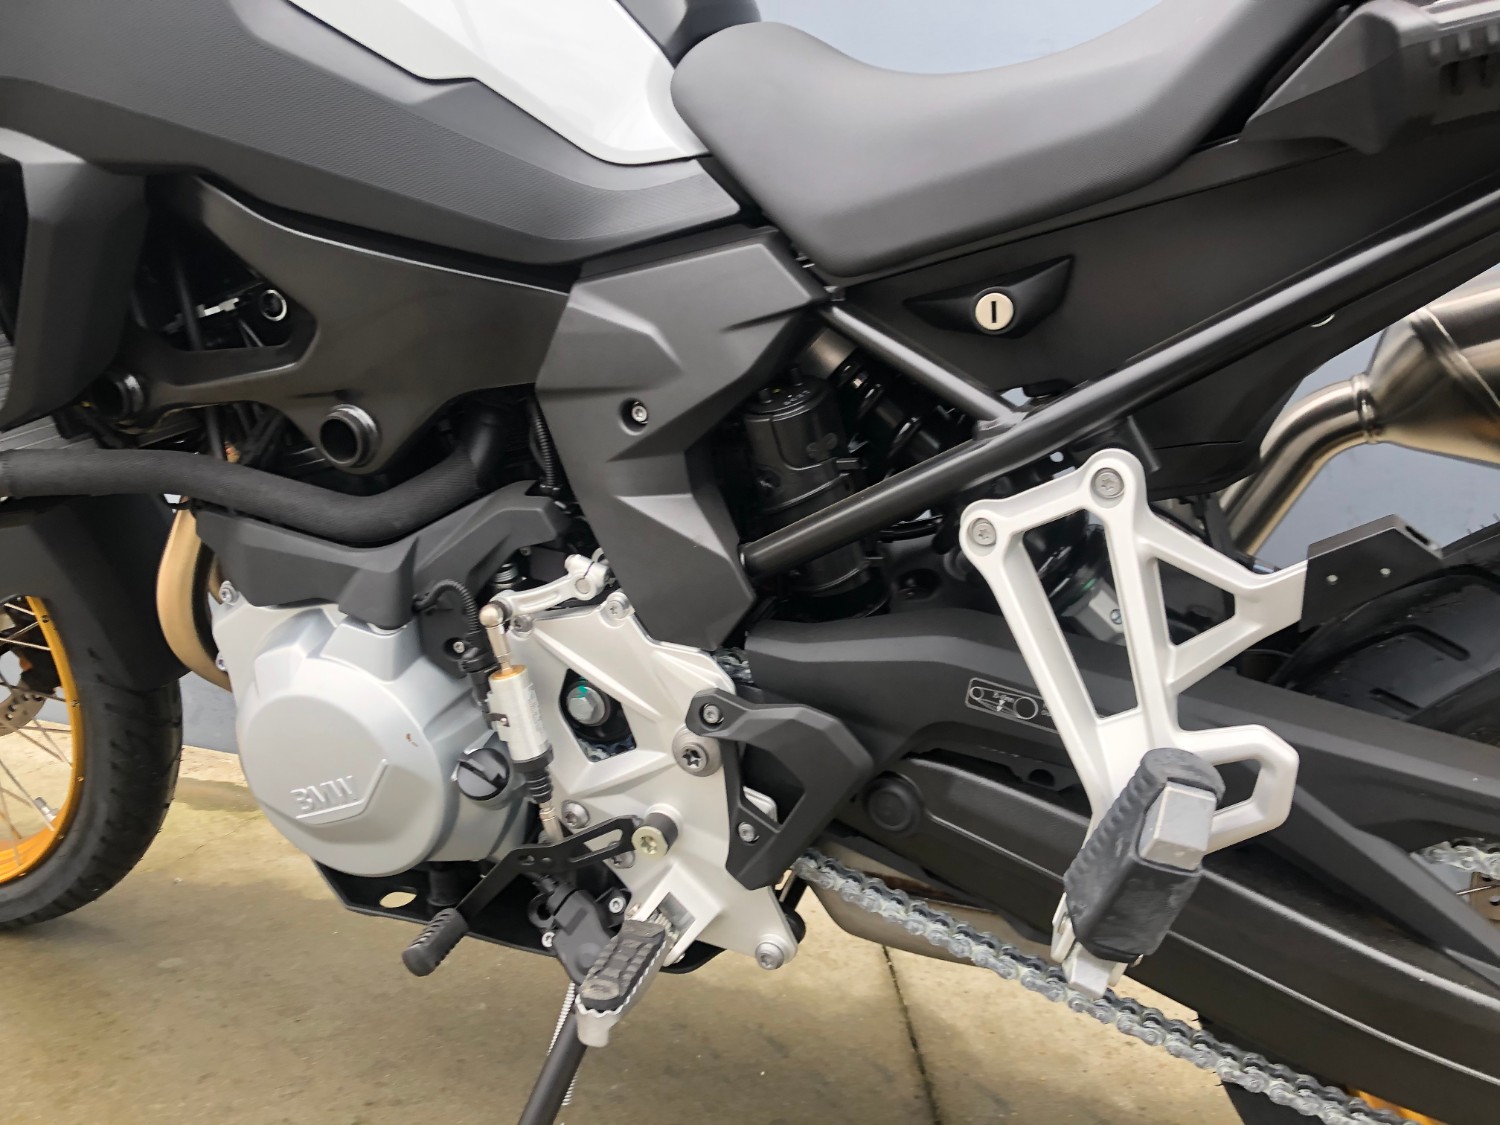 2019 BMW F850GS RallyE Low Suspension Motorcycle Image 10